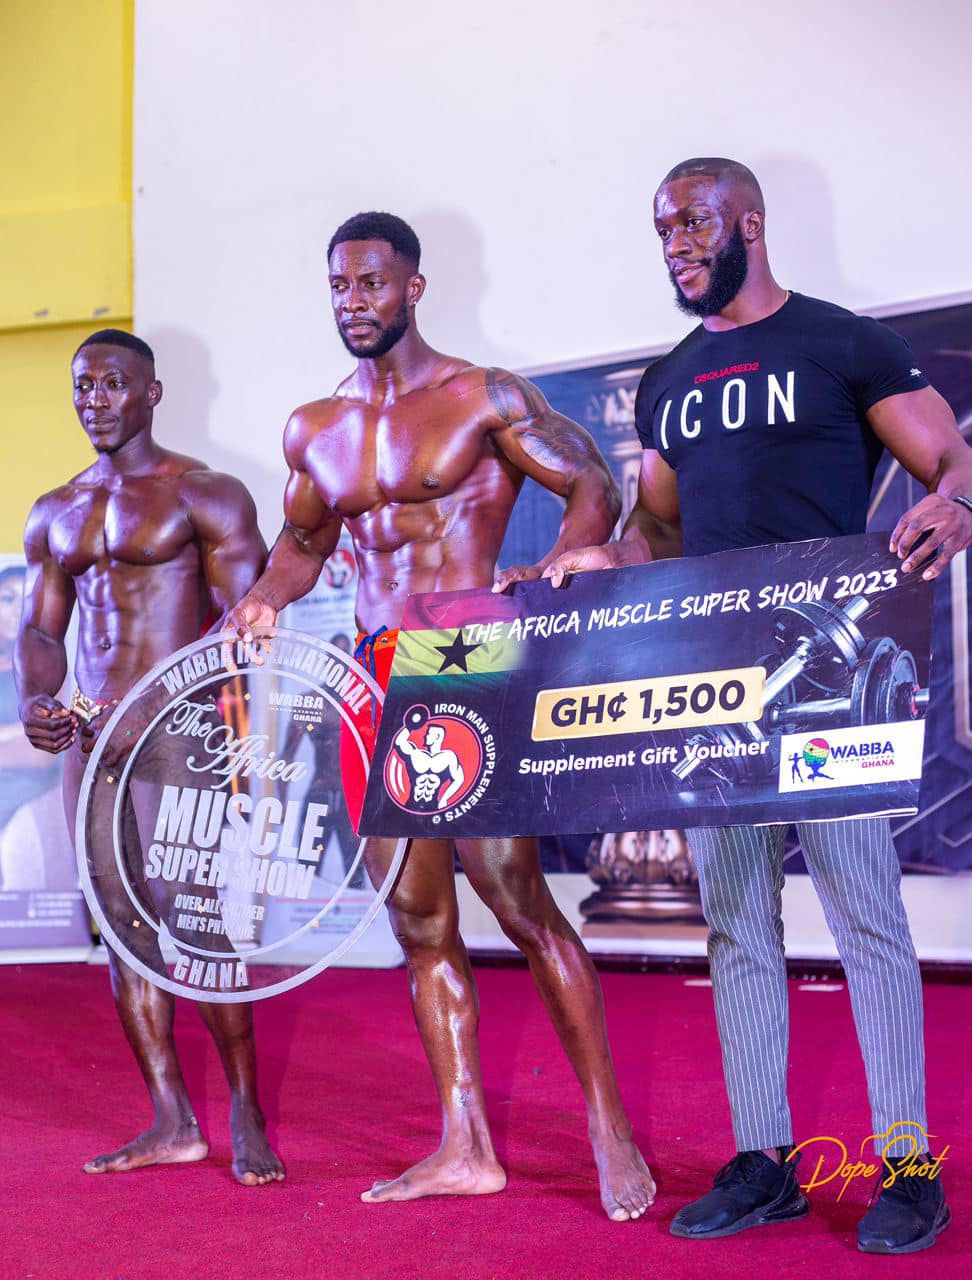 WABBA GHANA - Martinson Ampadu, renowned by the nickname "Rock of Africa - Winner at the Africa Muscle Super Show 2023 in Ghana